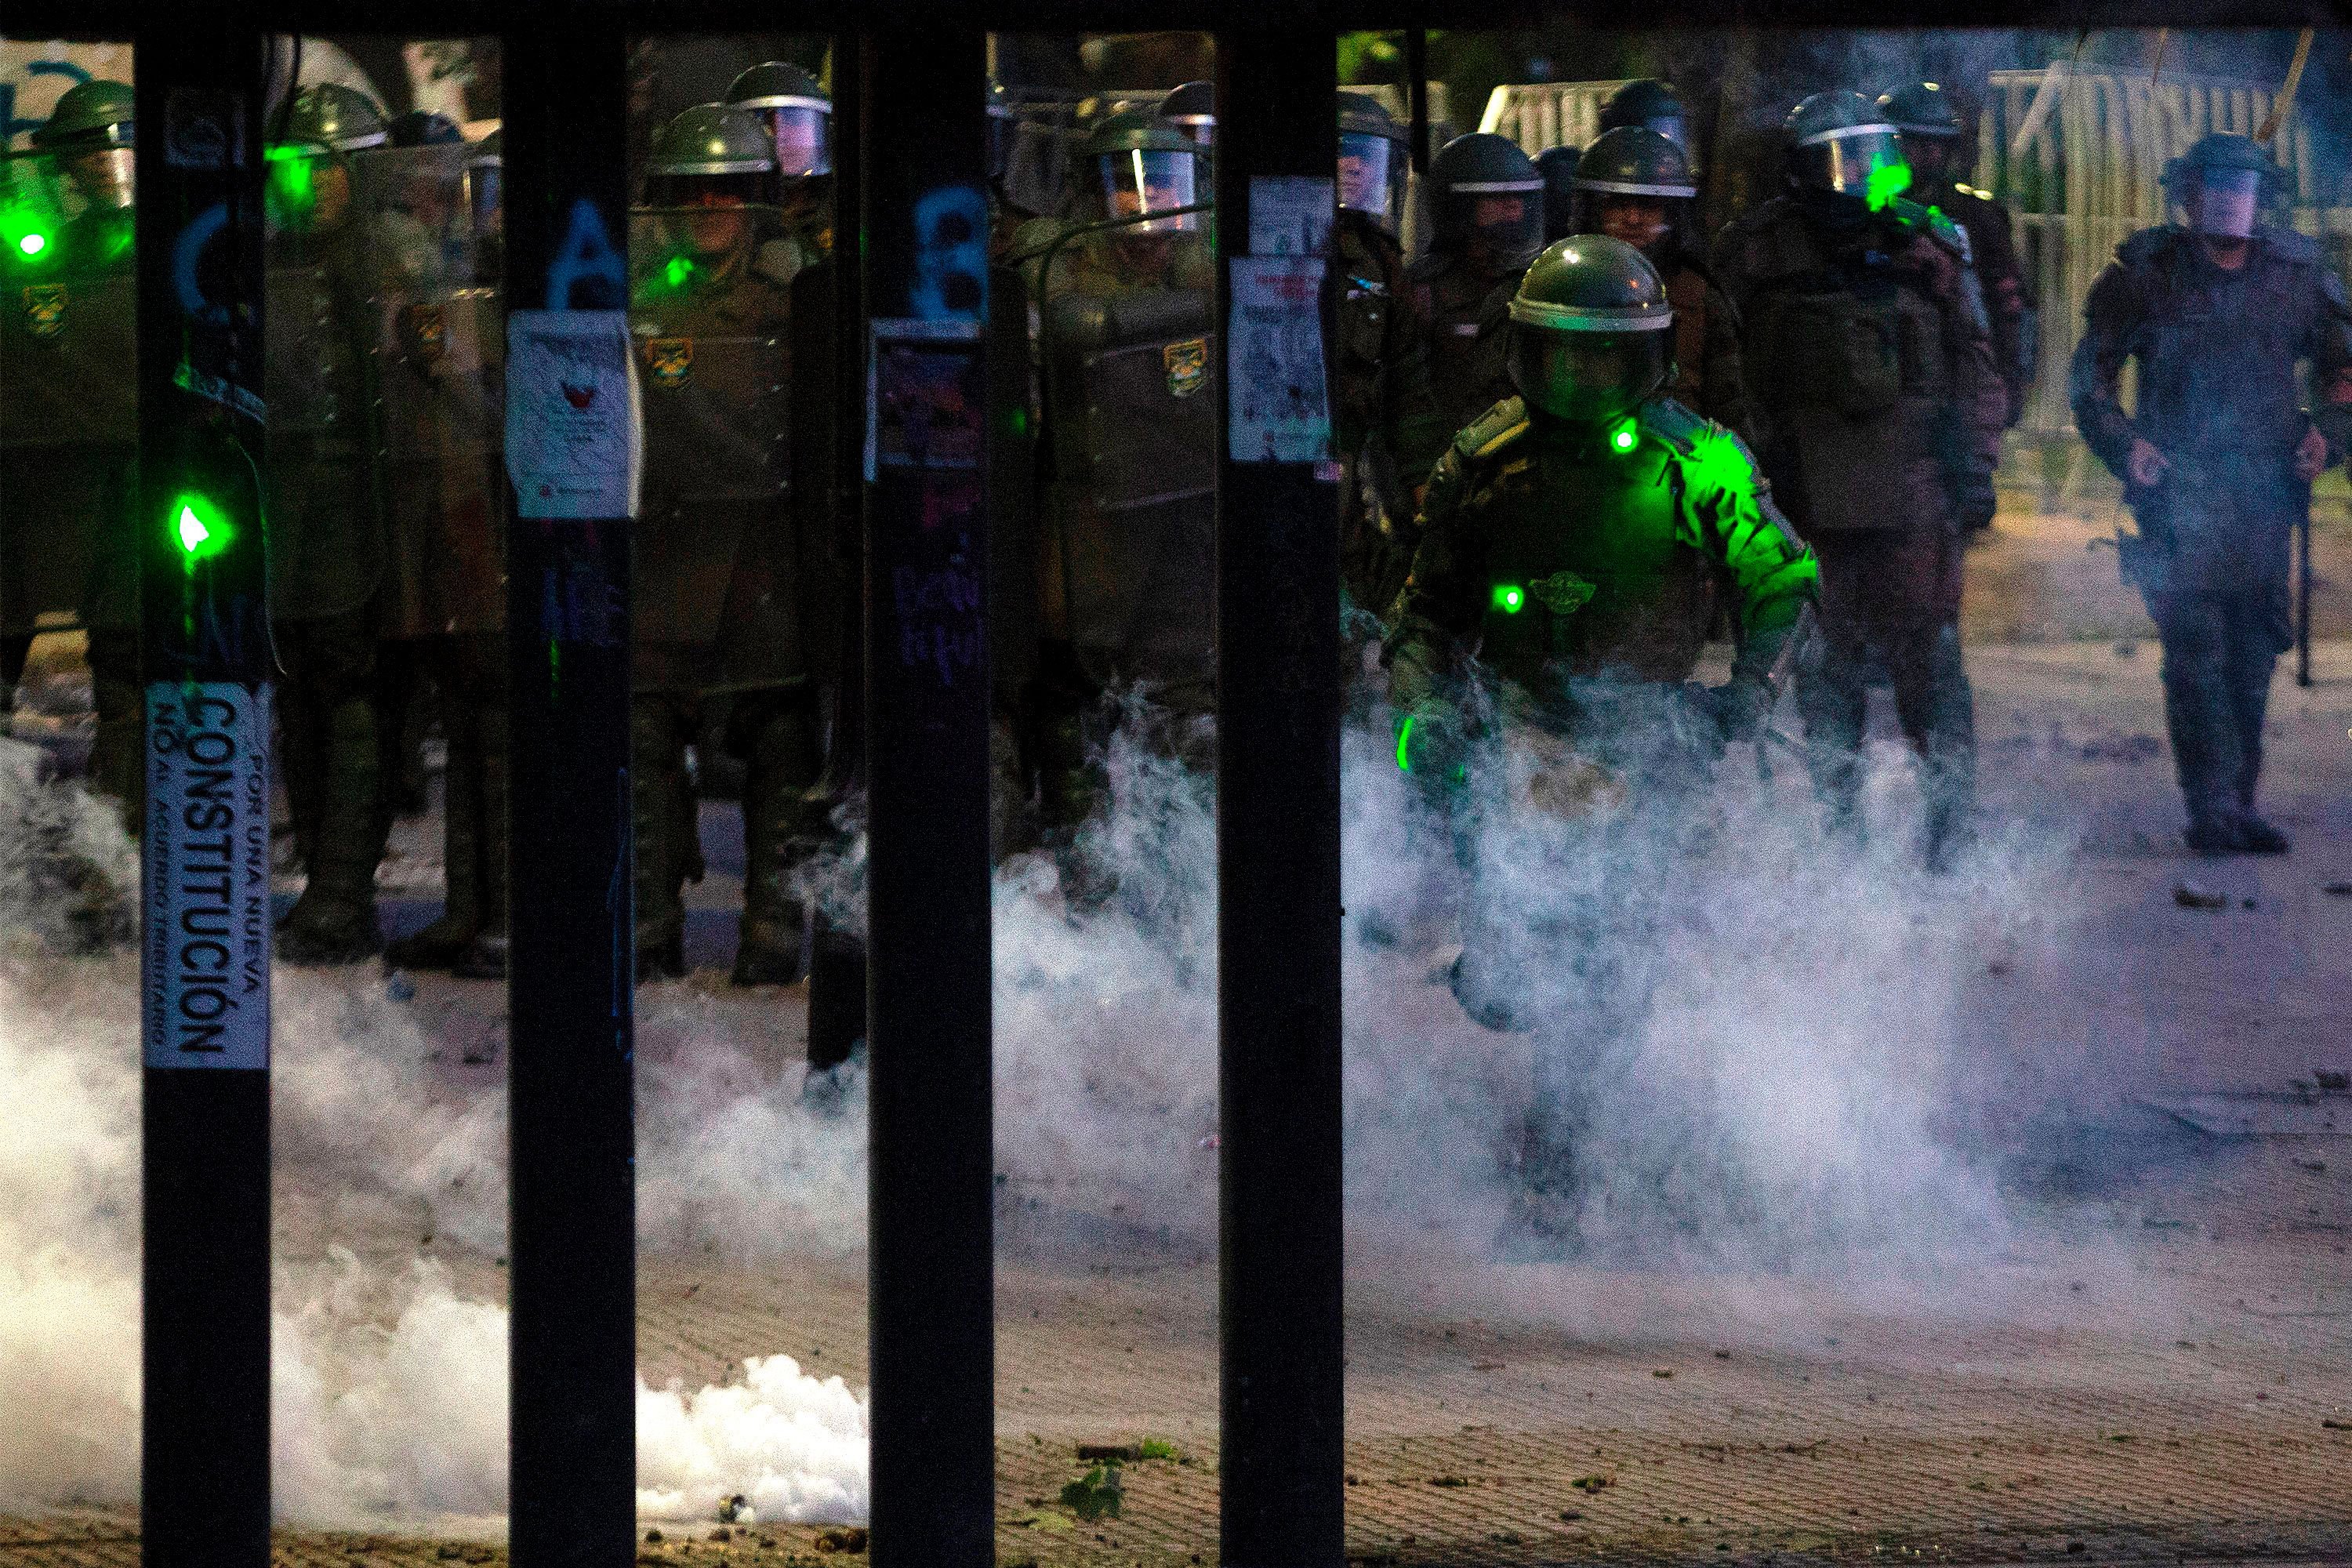 Riot police approach during a protest in Santiago, Chile, on November 22, 2019.